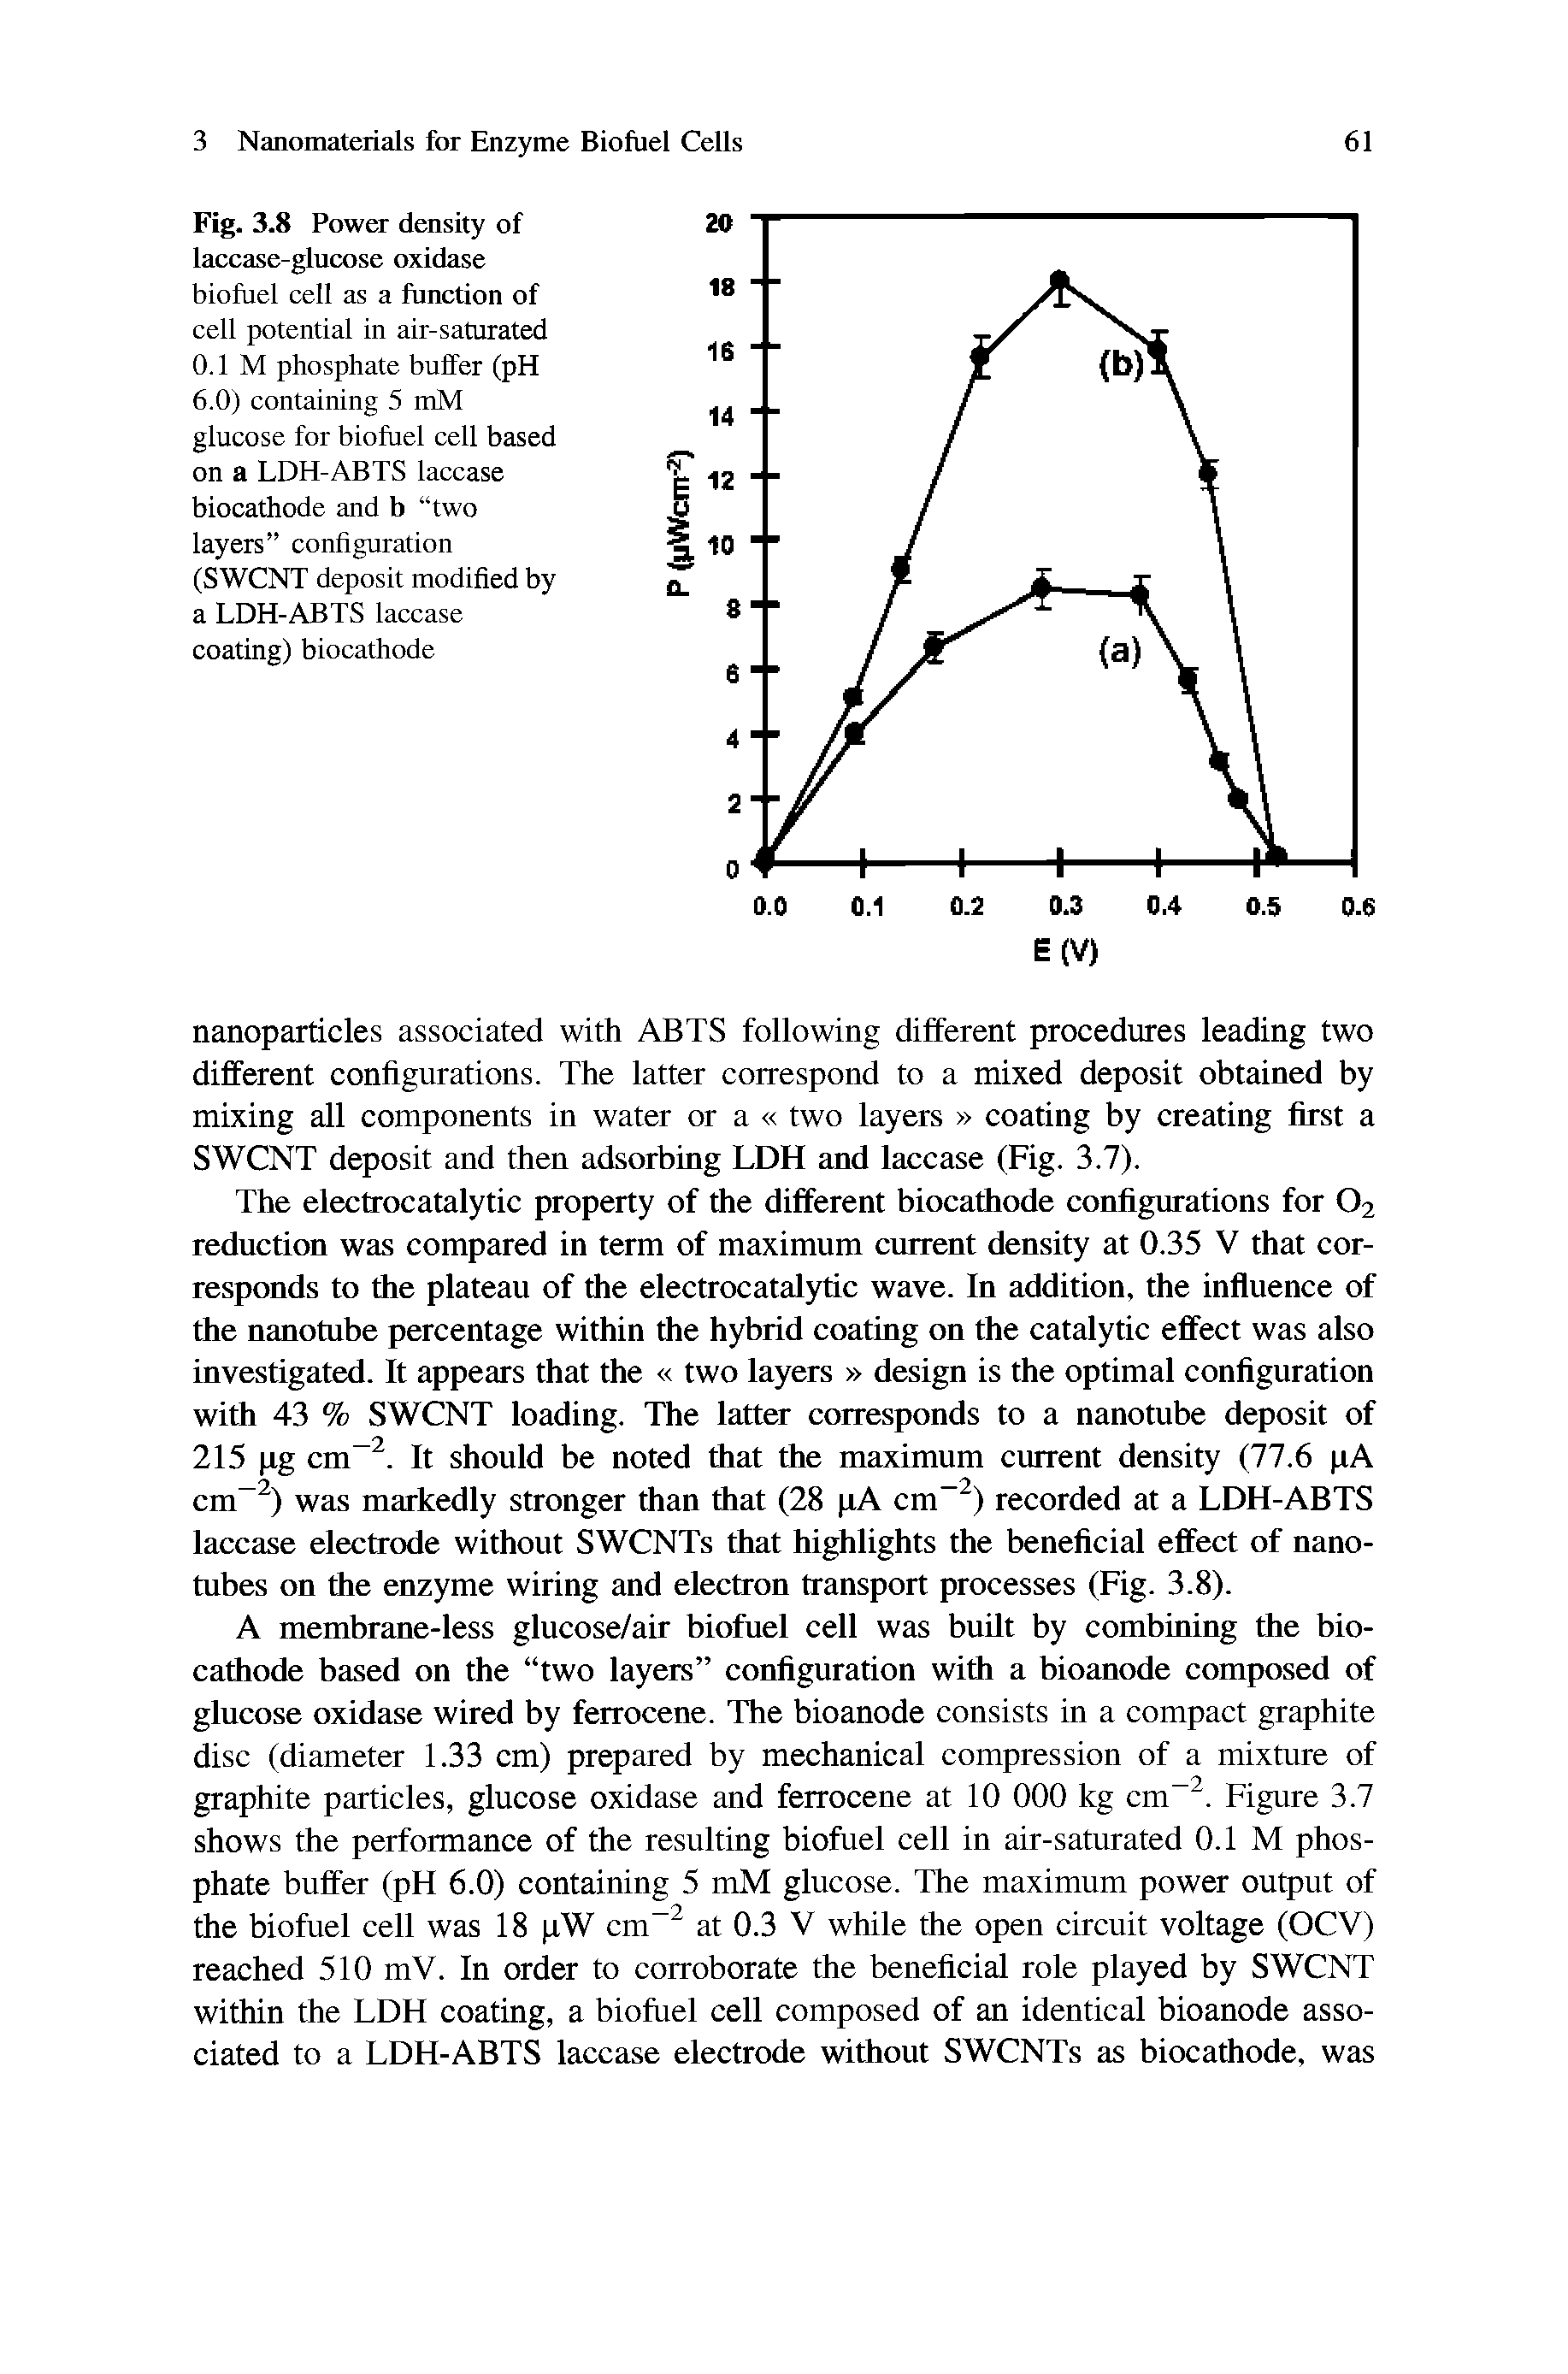 Fig. 3.8 Power density of laccase-glucose oxidase biofuel cell as a function of cell potential in air-saturated 0.1 M phosphate buffer (pH 6.0) containing 5 mM glucose for biofuel cell based on a LDH-ABTS laccase biocathode and b two layers configuration (SWCNT deposit modified by a LDH-ABTS laccase coating) biocathode...